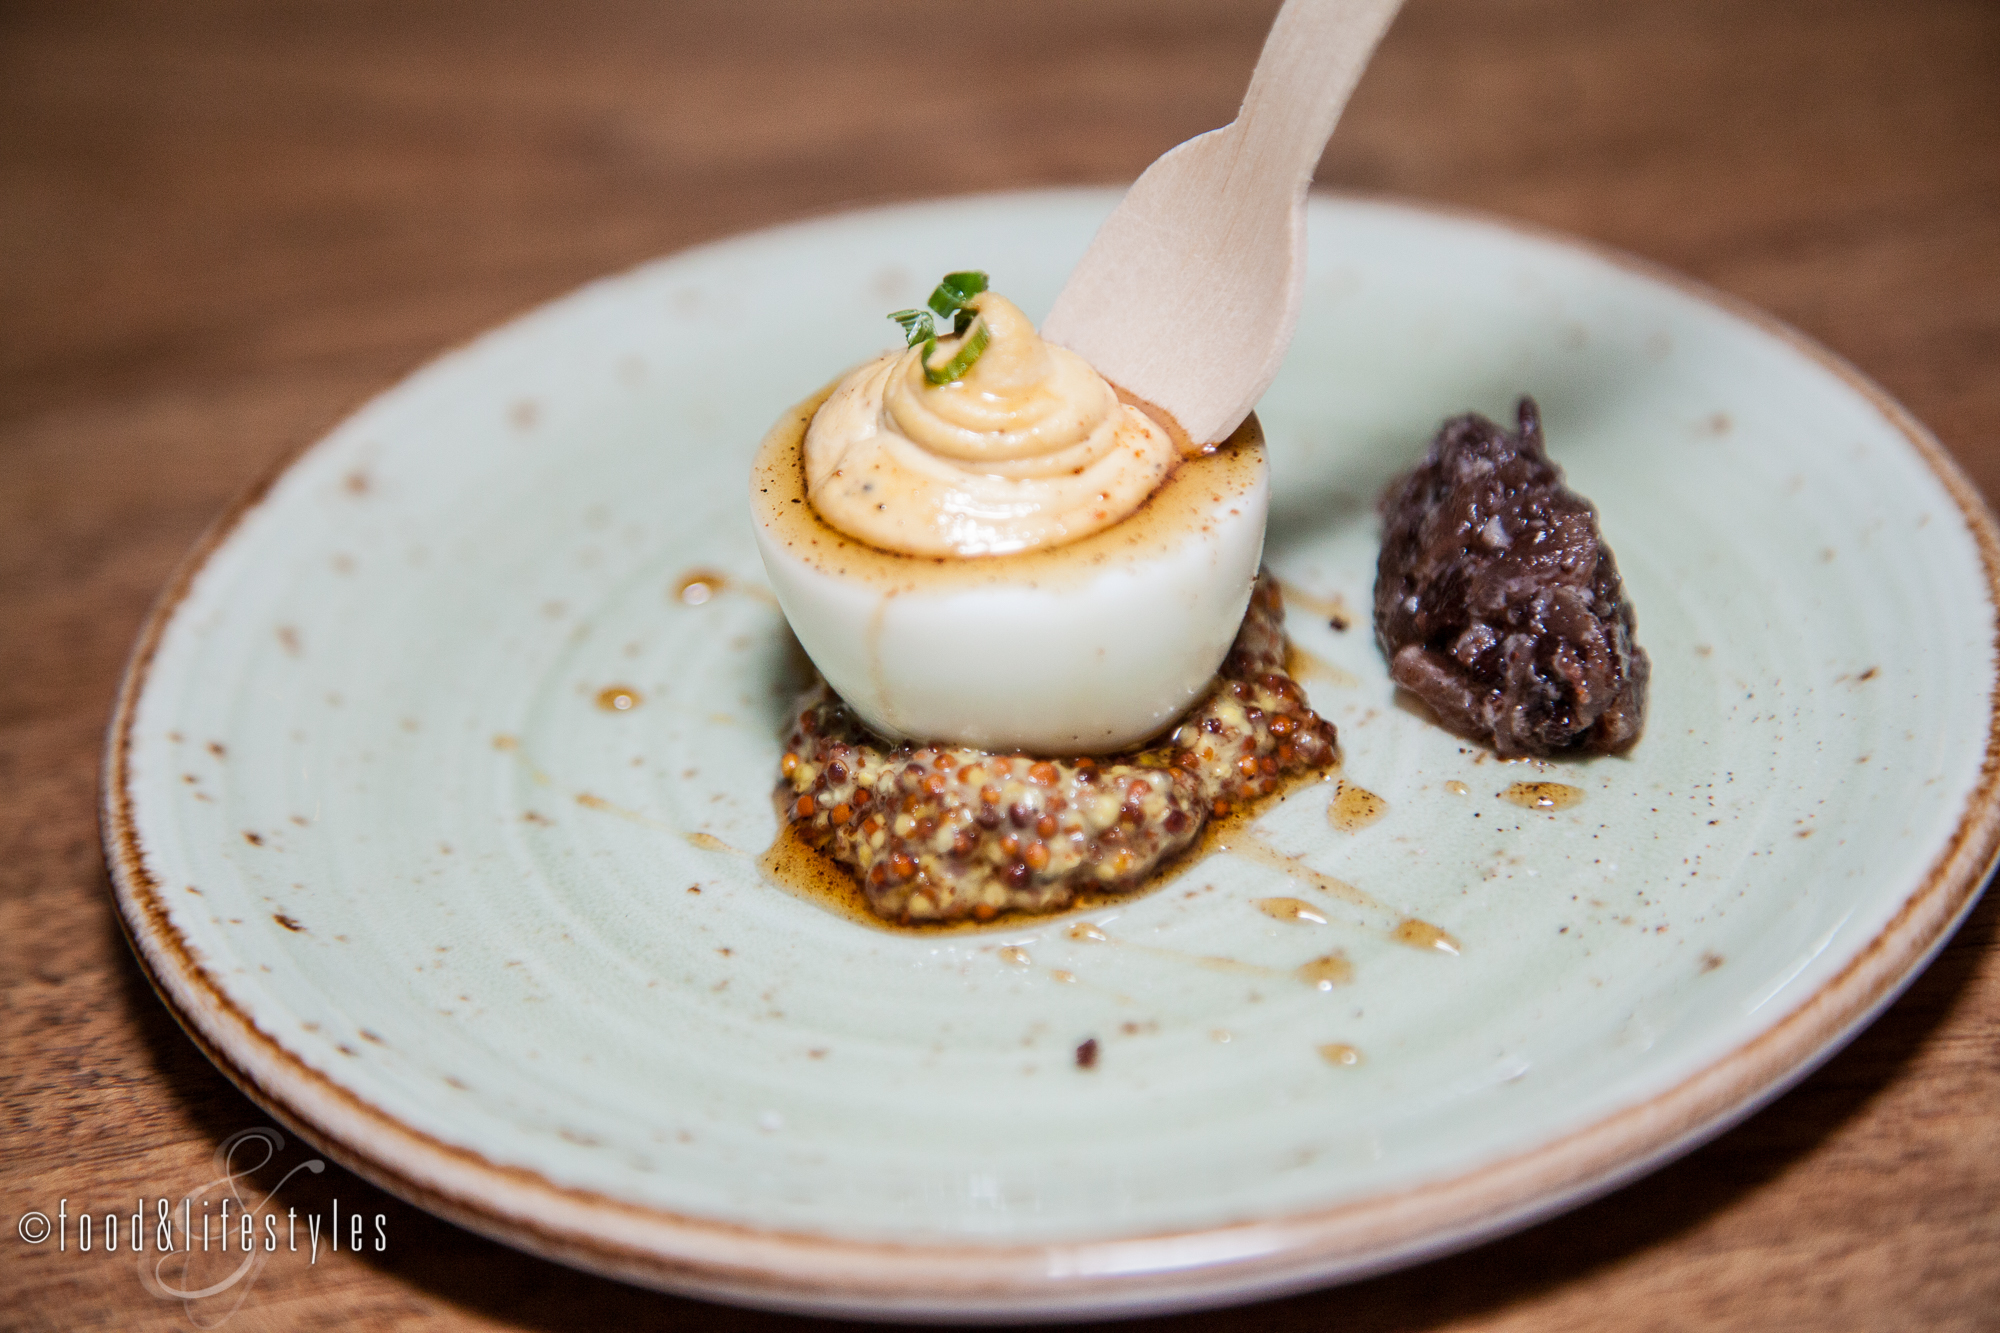 Deviled egg with pasilla-maple syrup, bacon-onion marmalade and grain mustard